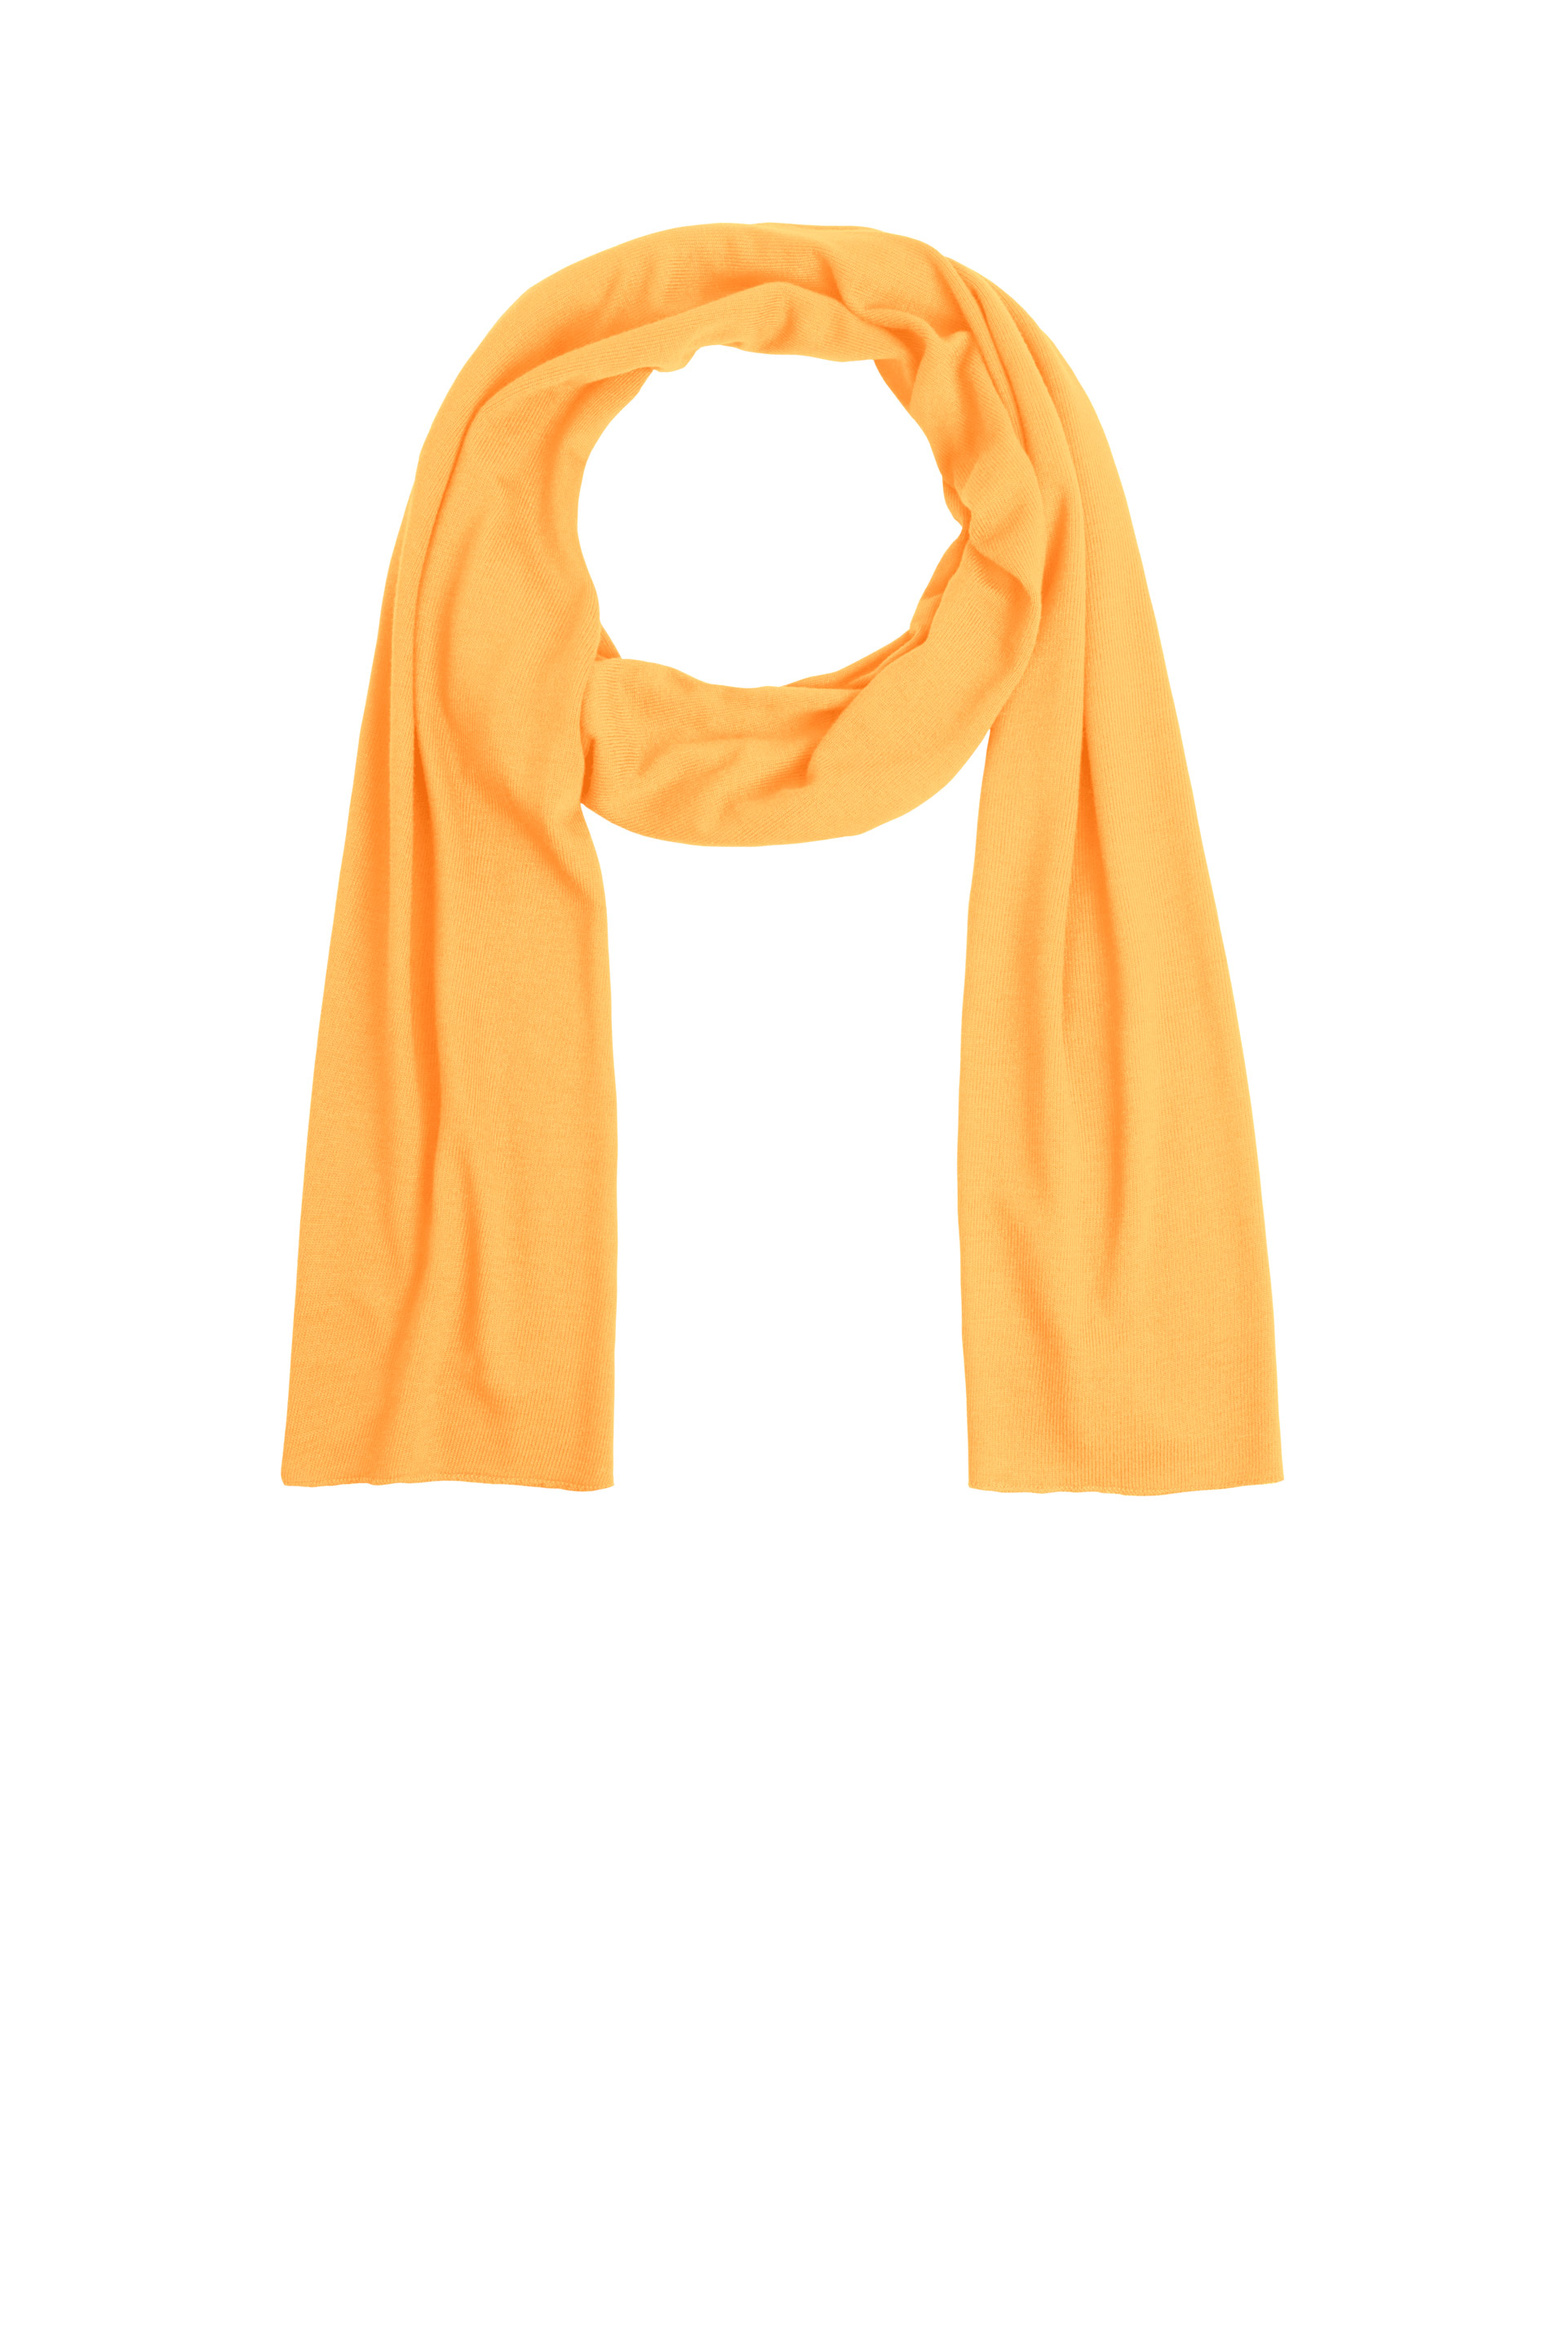 33028_willow_scarf_bright_apricot.jpg